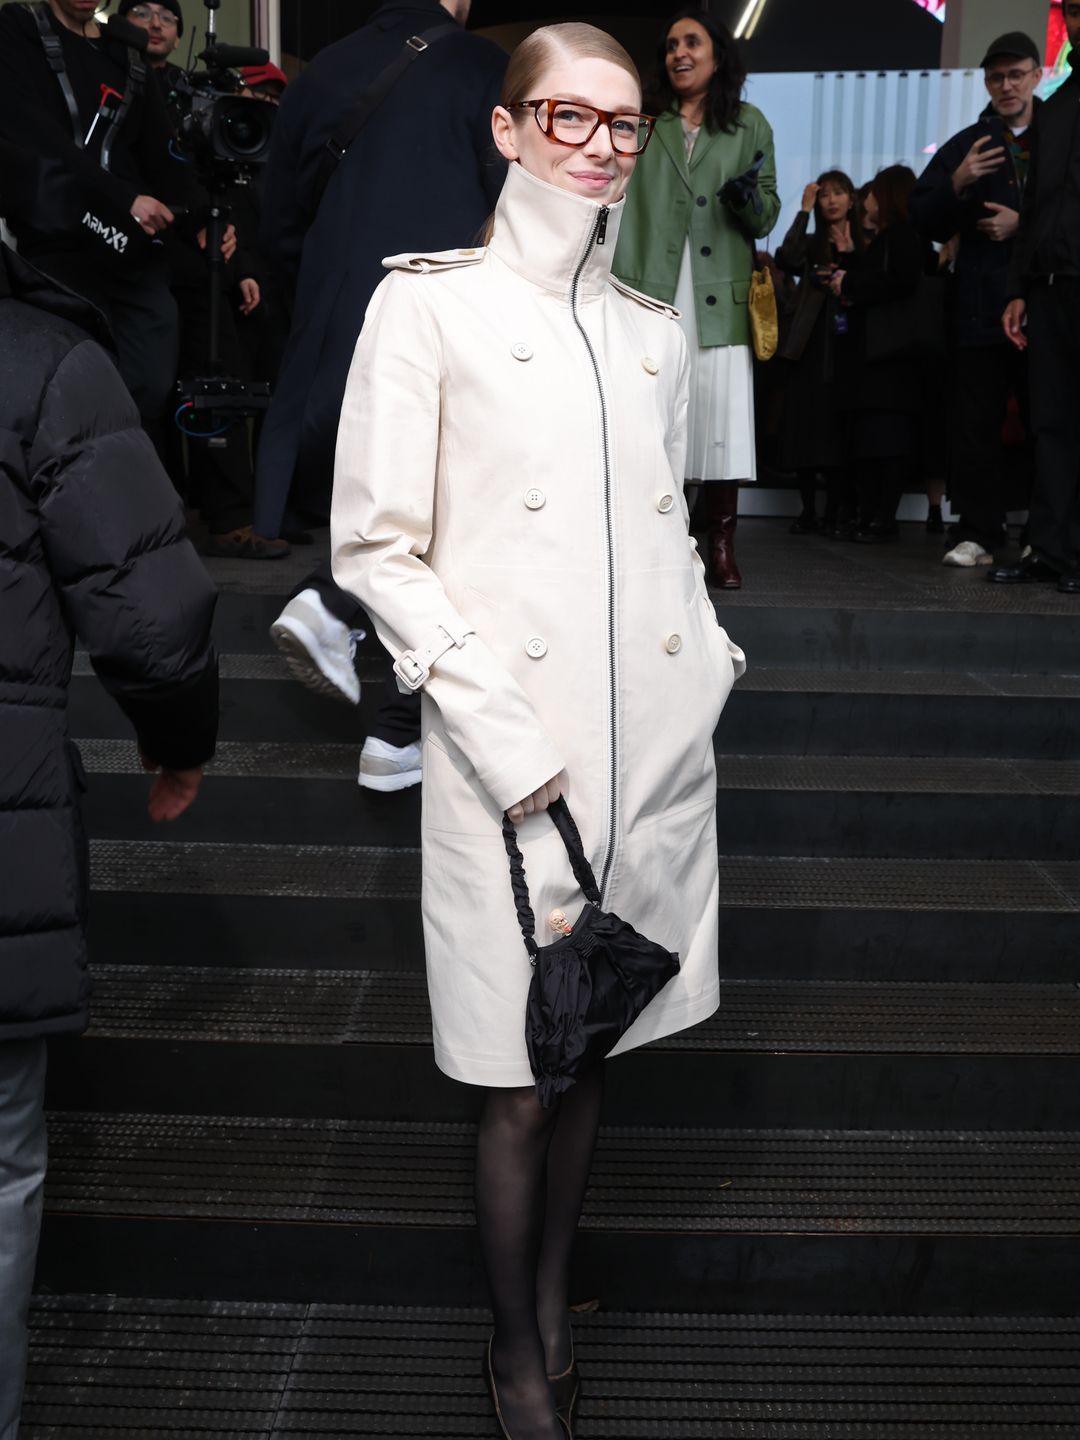 Hunter Schafer is seen arriving at the Prada fashion show in a zip-up trench coat, tights and heels